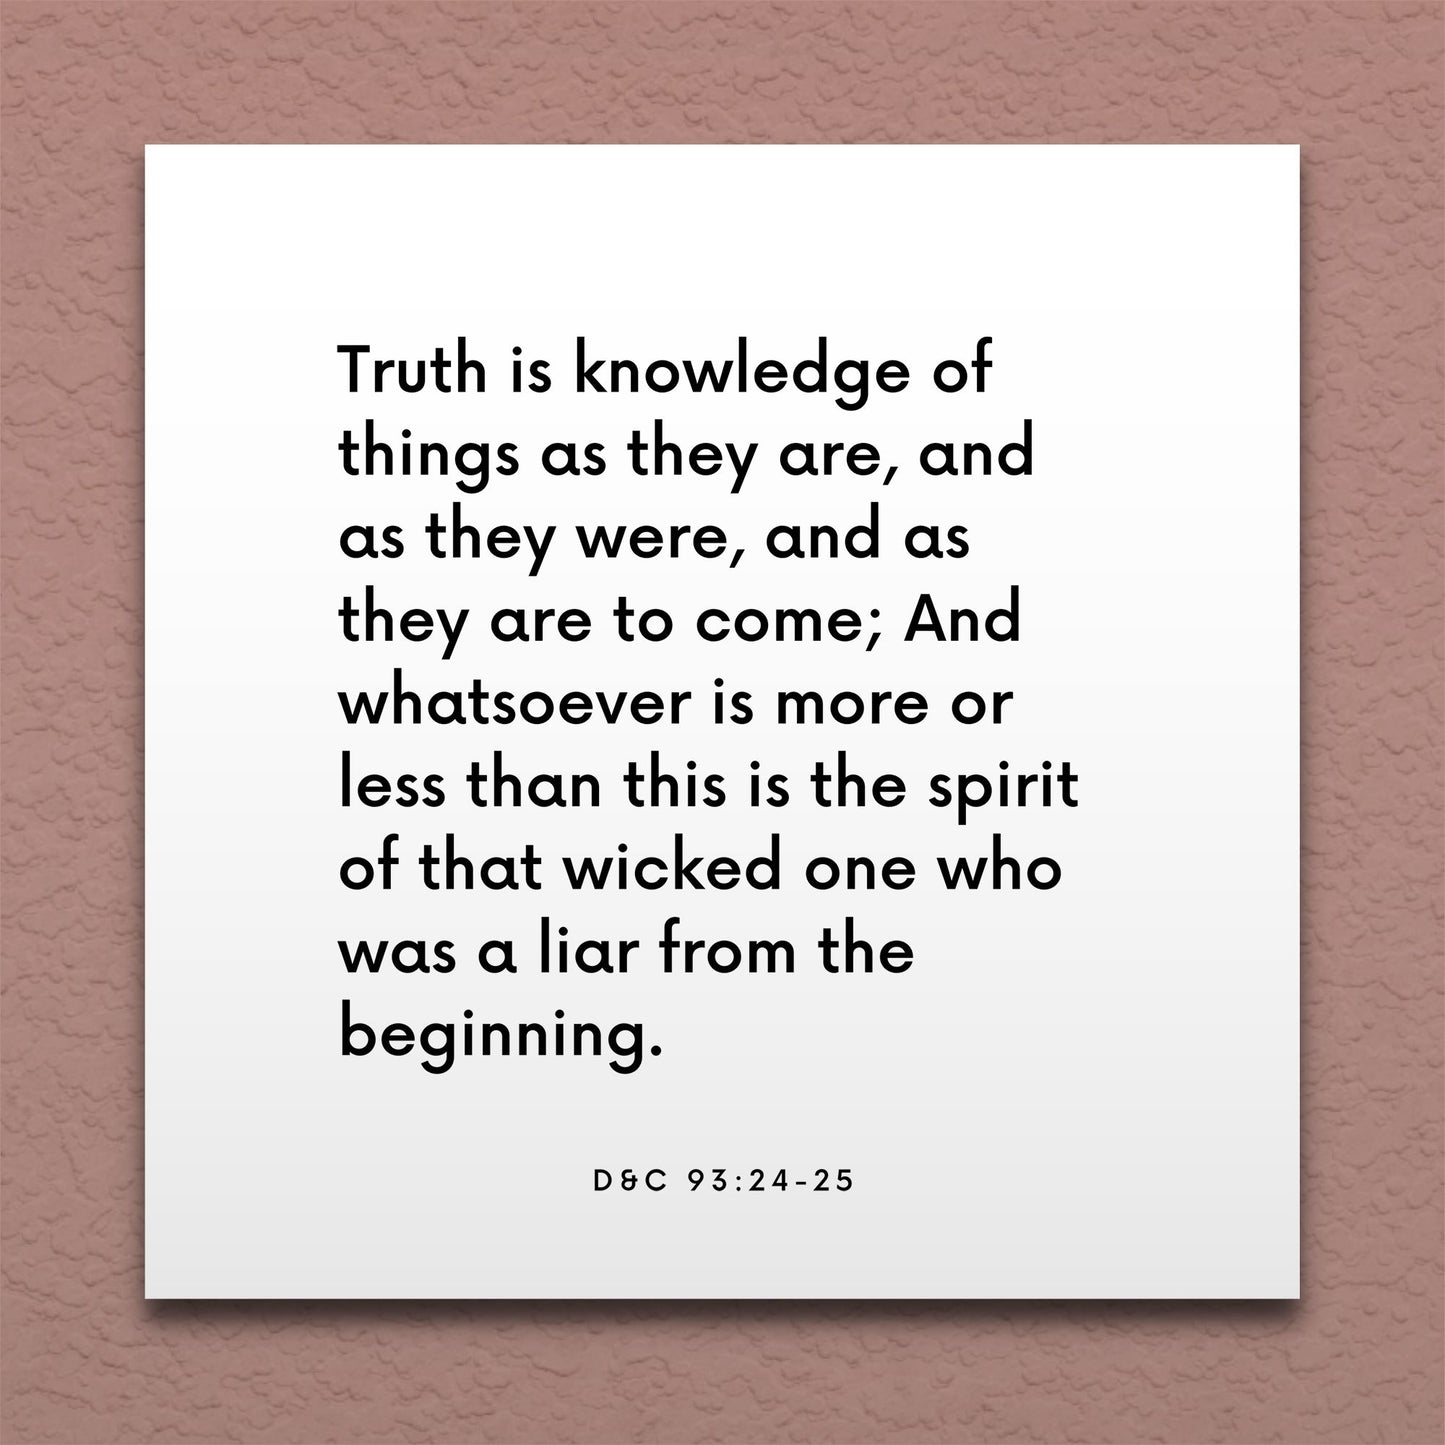 Wall-mounted scripture tile for D&C 93:24-25 - "Truth is knowledge of things as they are"